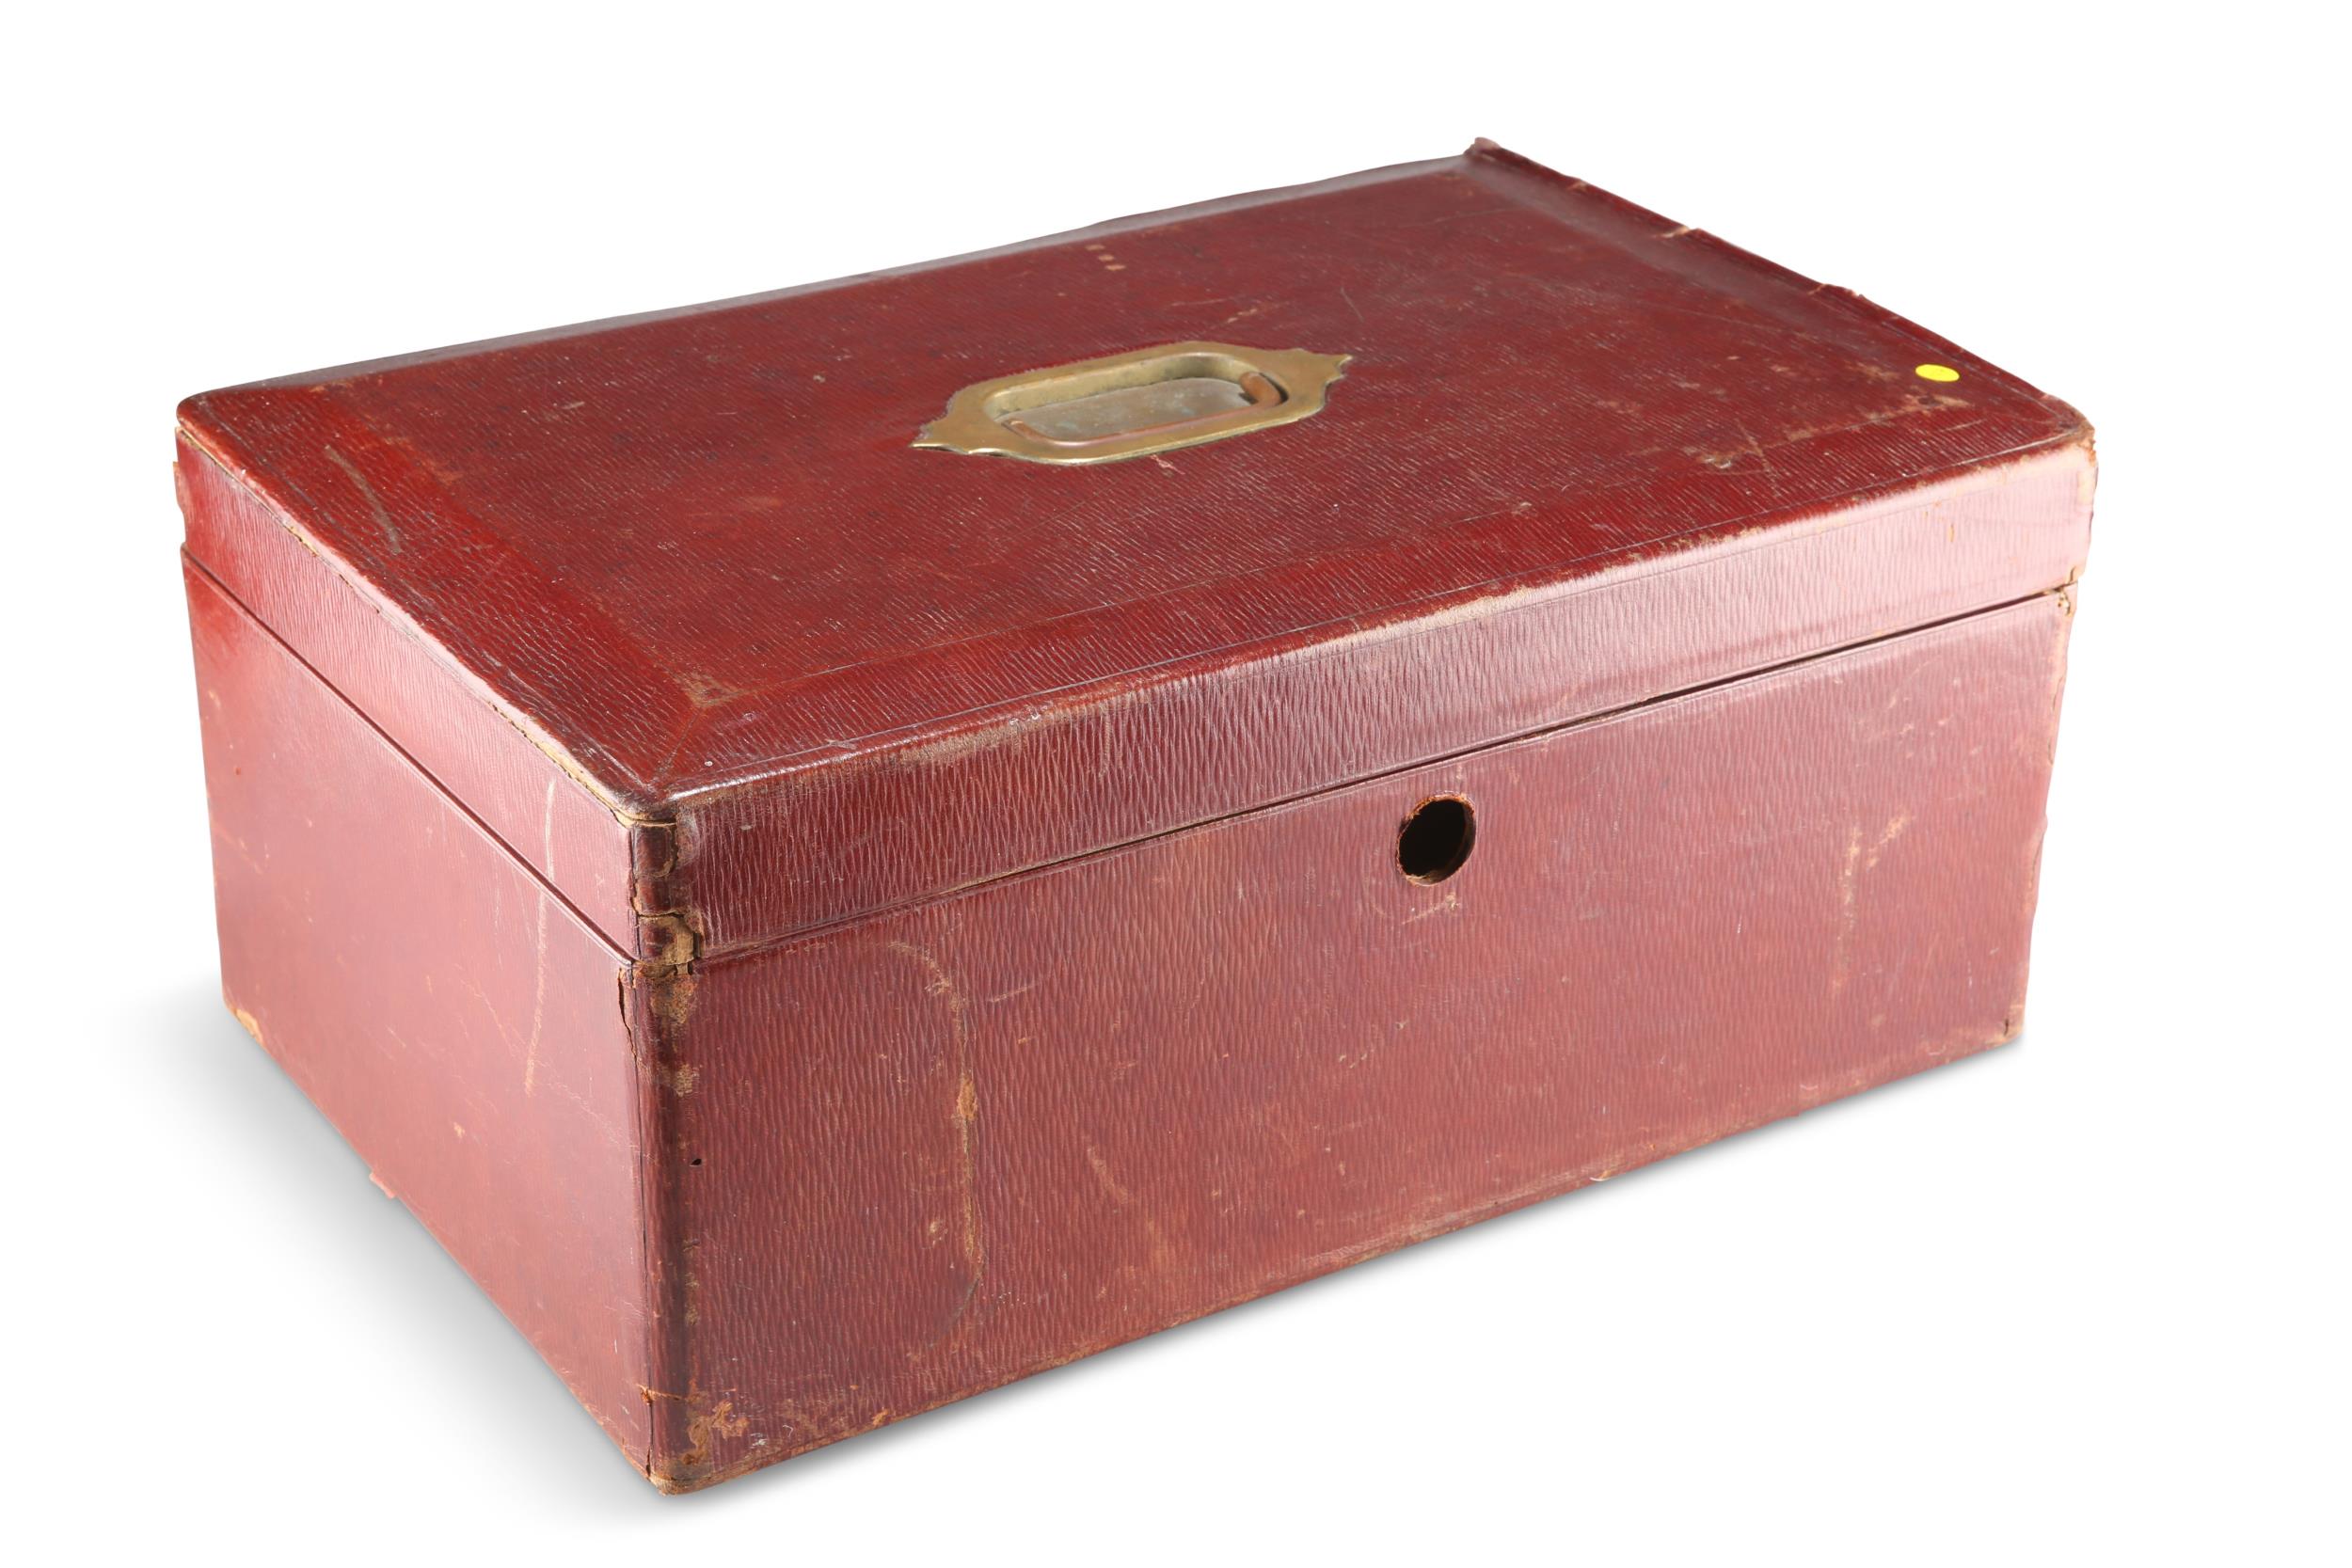 A GEORGE V LARGE RED MOROCCO LEATHER DESPATCH BOX